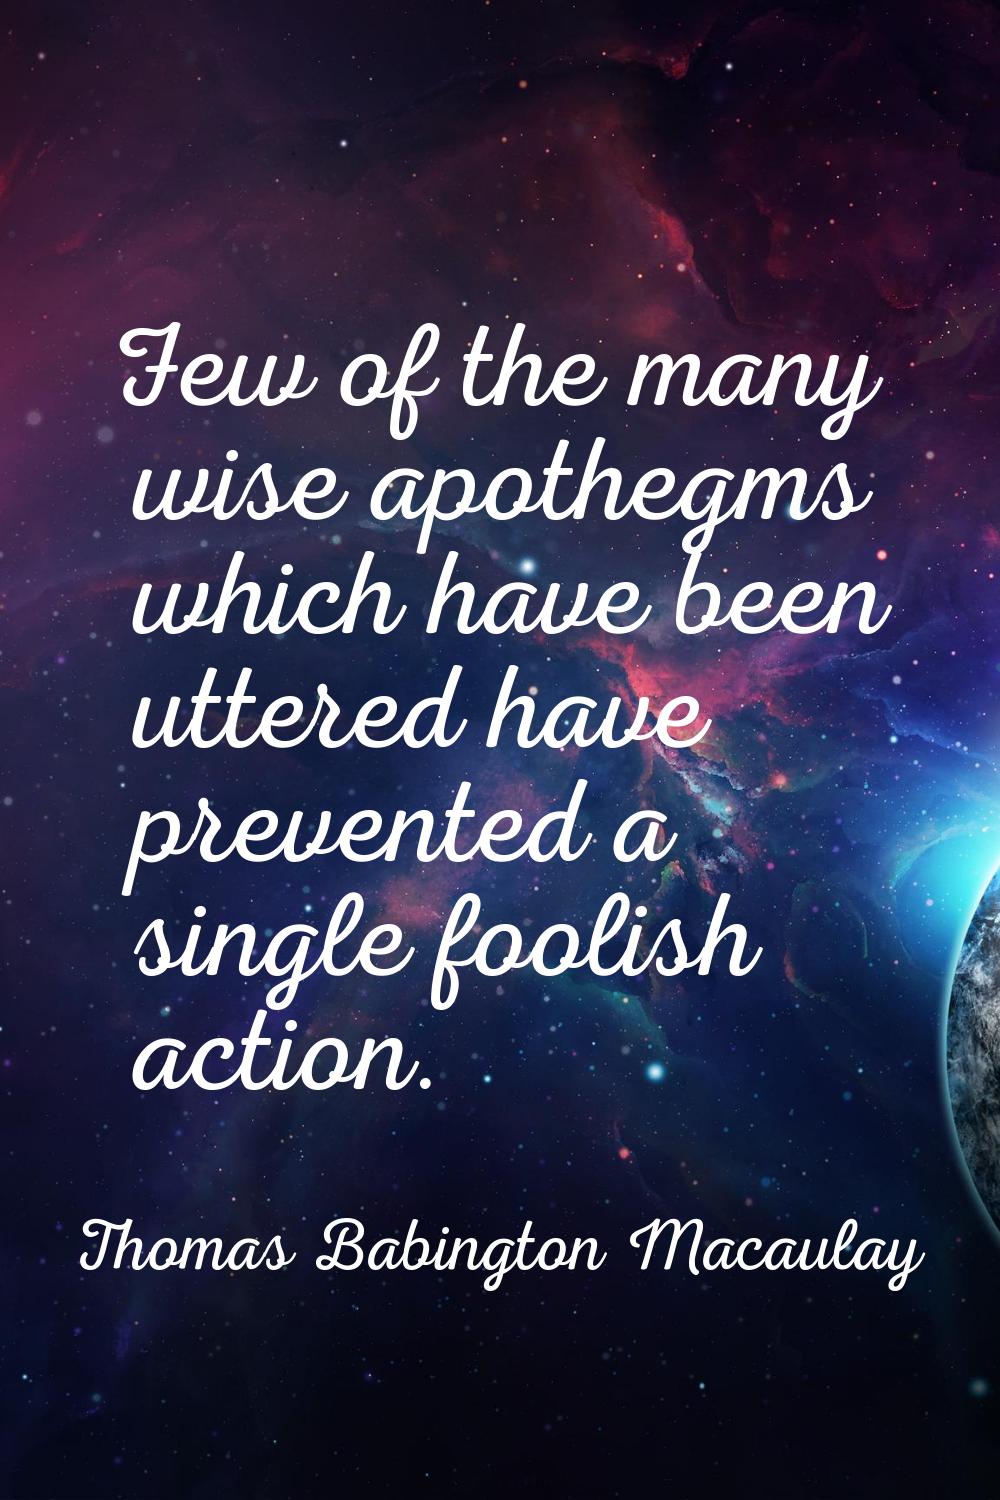 Few of the many wise apothegms which have been uttered have prevented a single foolish action.